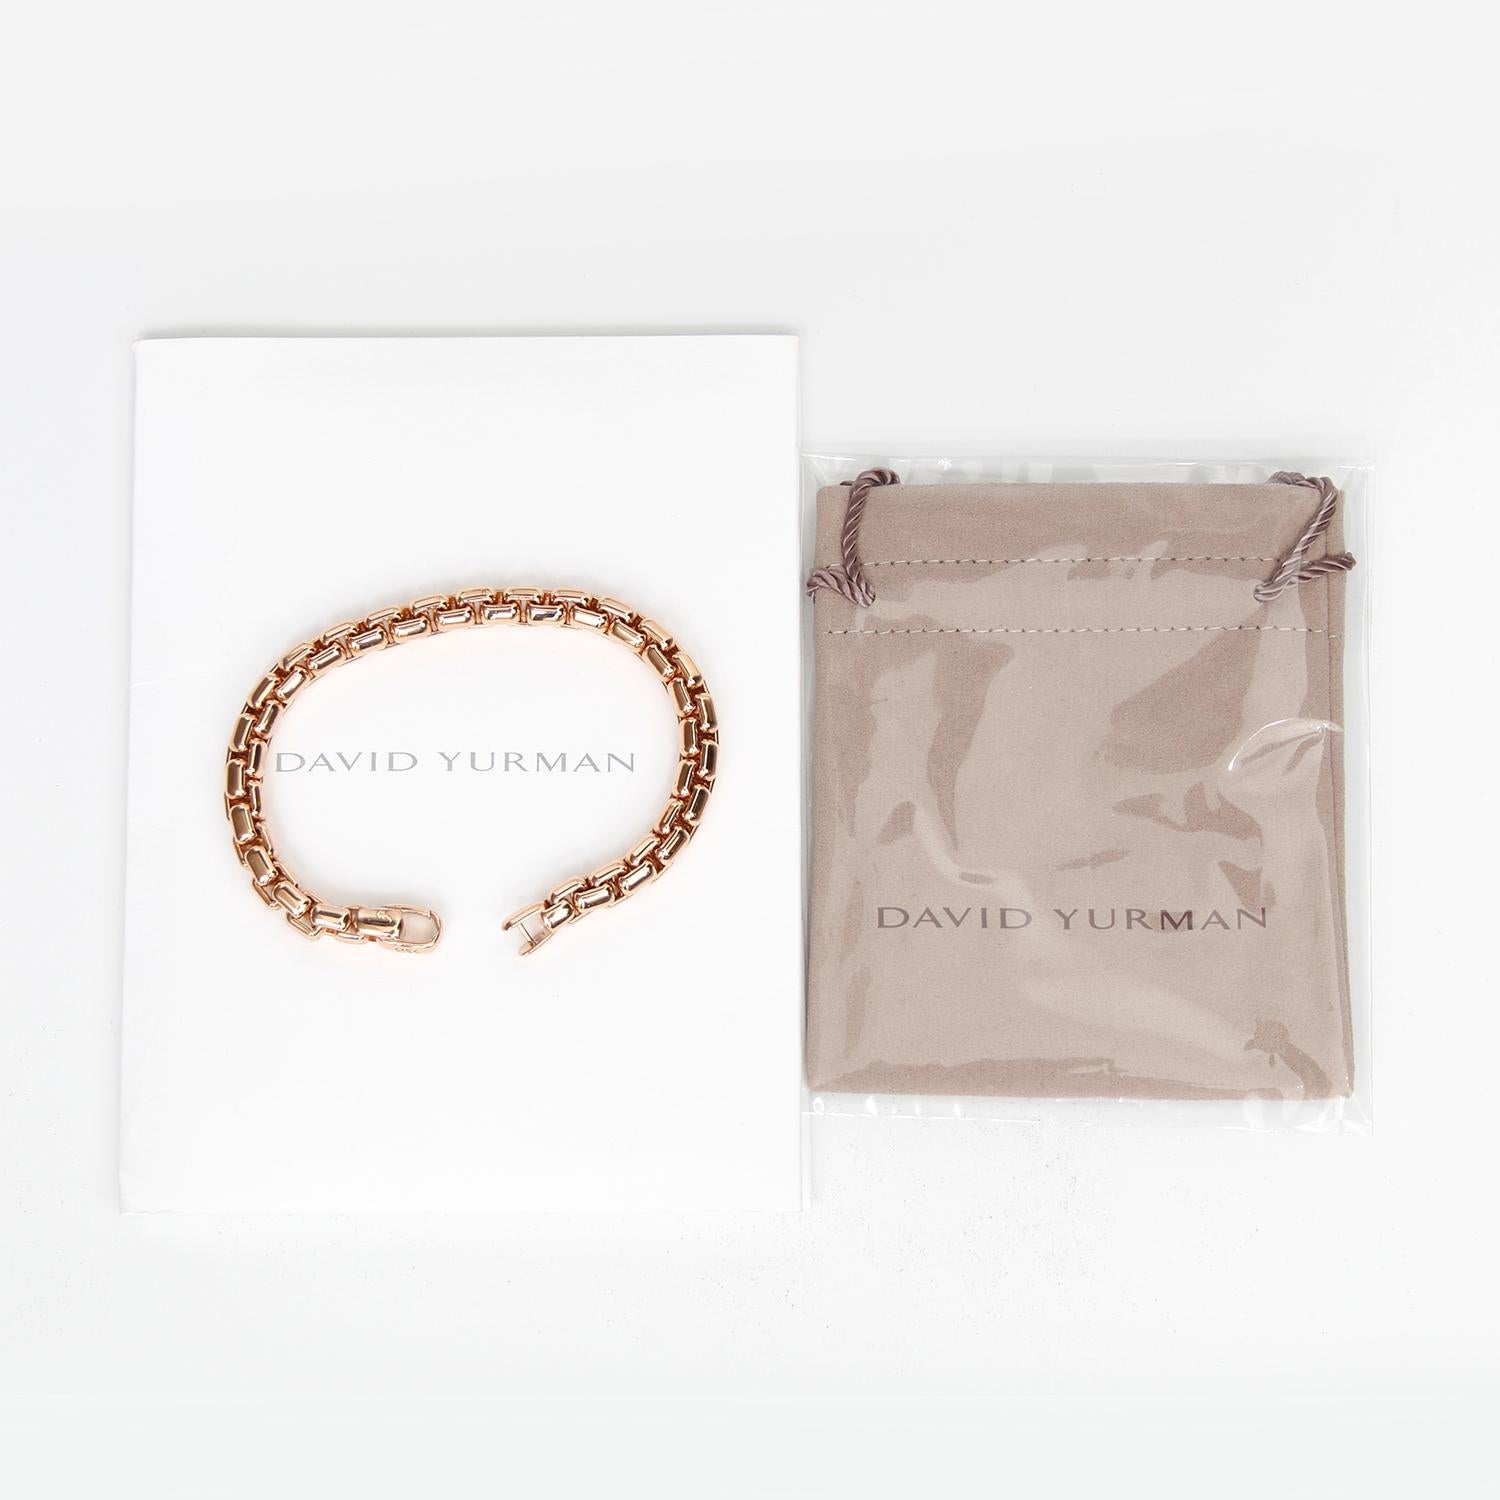 David Yurman Box Chain 18K Rose Gold Bracelet - 18K rose gold chain. 7.5 MM wide with Lobster clasp. Hallmarks include Makers mark and 18K. Pre-owned with David Yurman pouch. Will up to a 7 1/2 inch wrist. Links can be taken off too. 